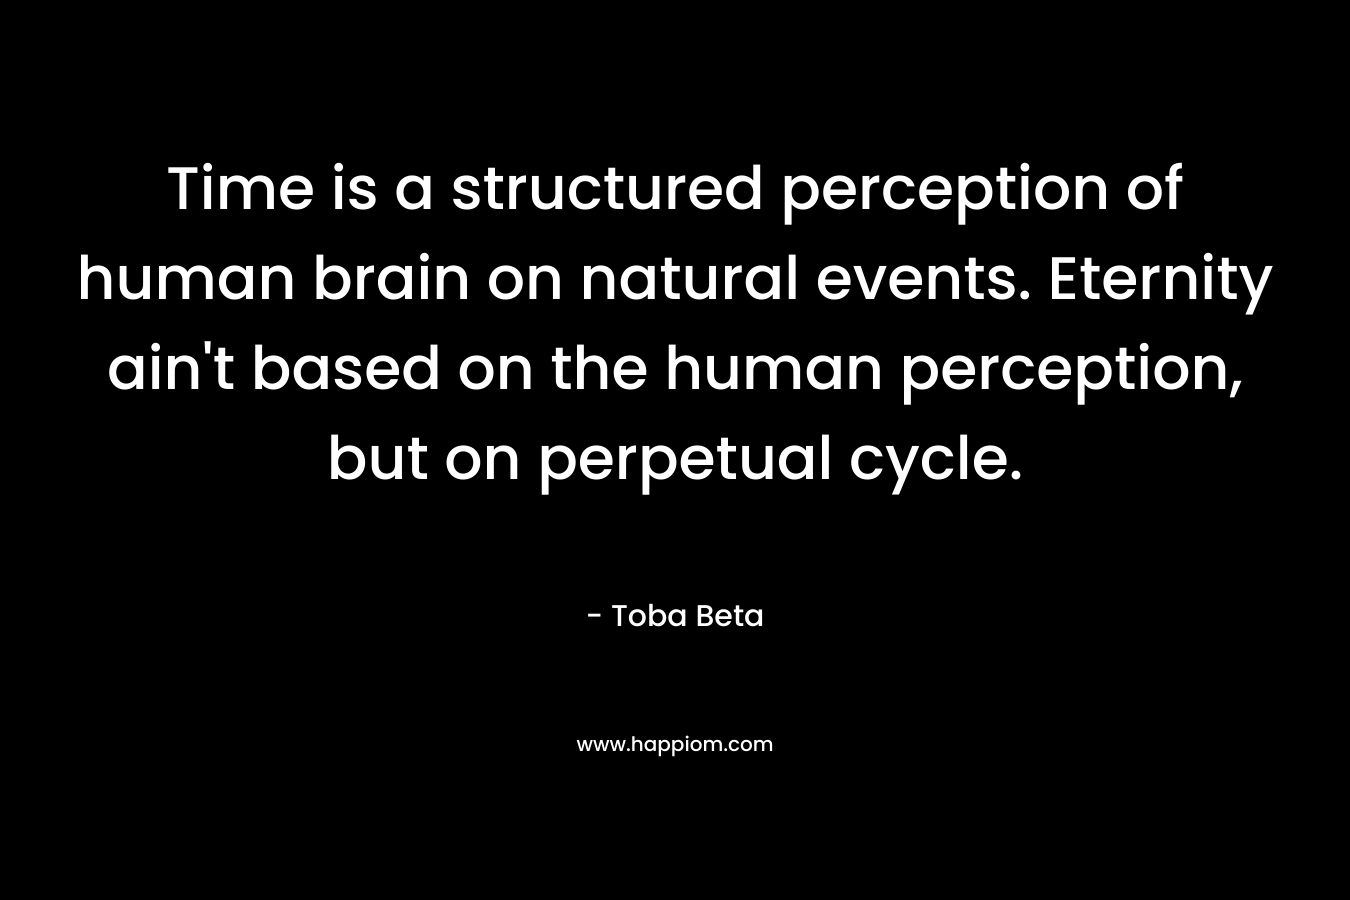 Time is a structured perception of human brain on natural events. Eternity ain't based on the human perception, but on perpetual cycle.